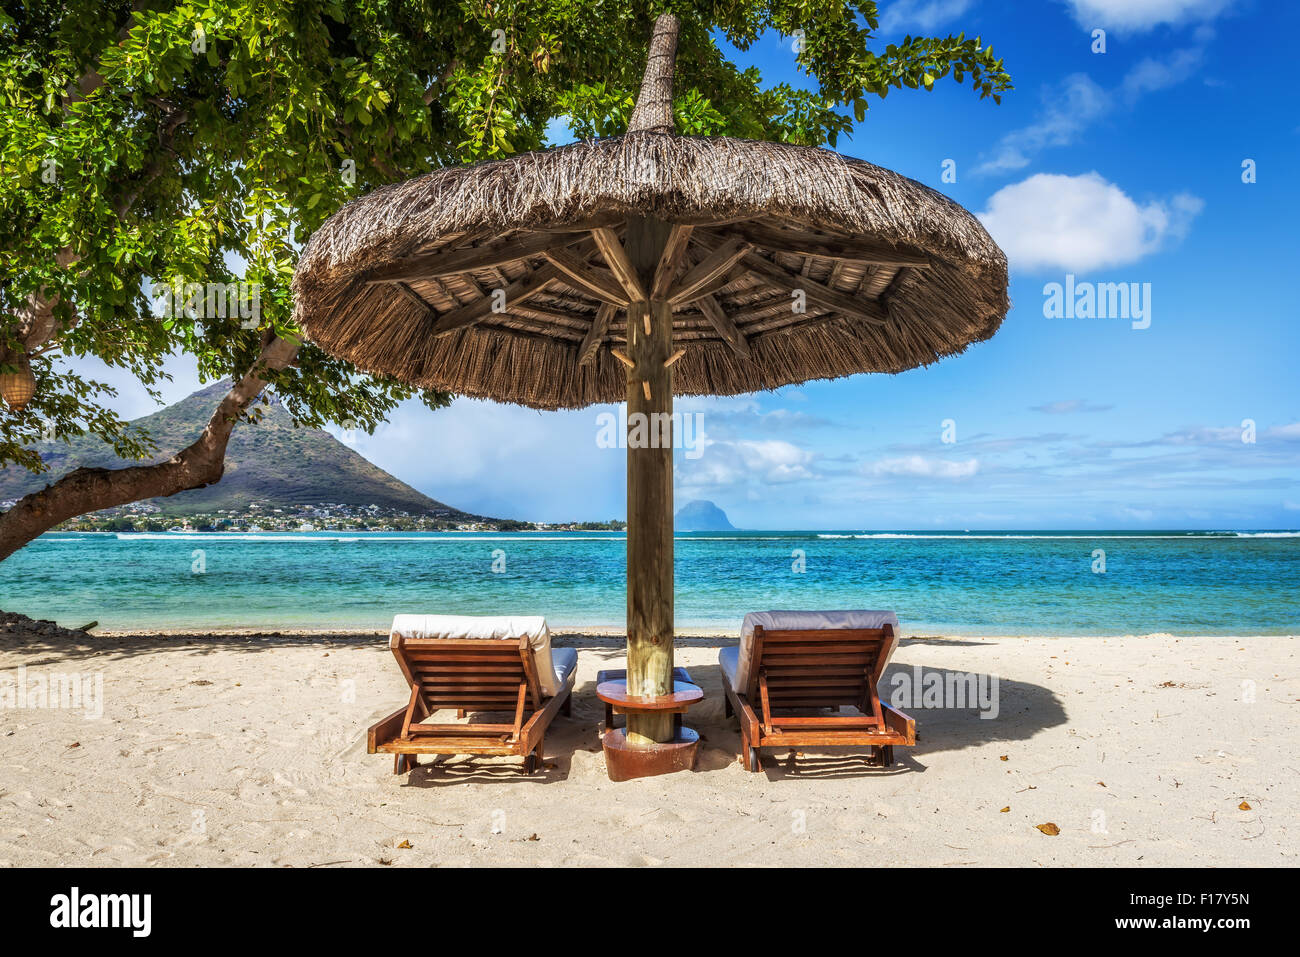 Loungers and umbrella on tropical beach in Mauritius Island, Indian Ocean Stock Photo